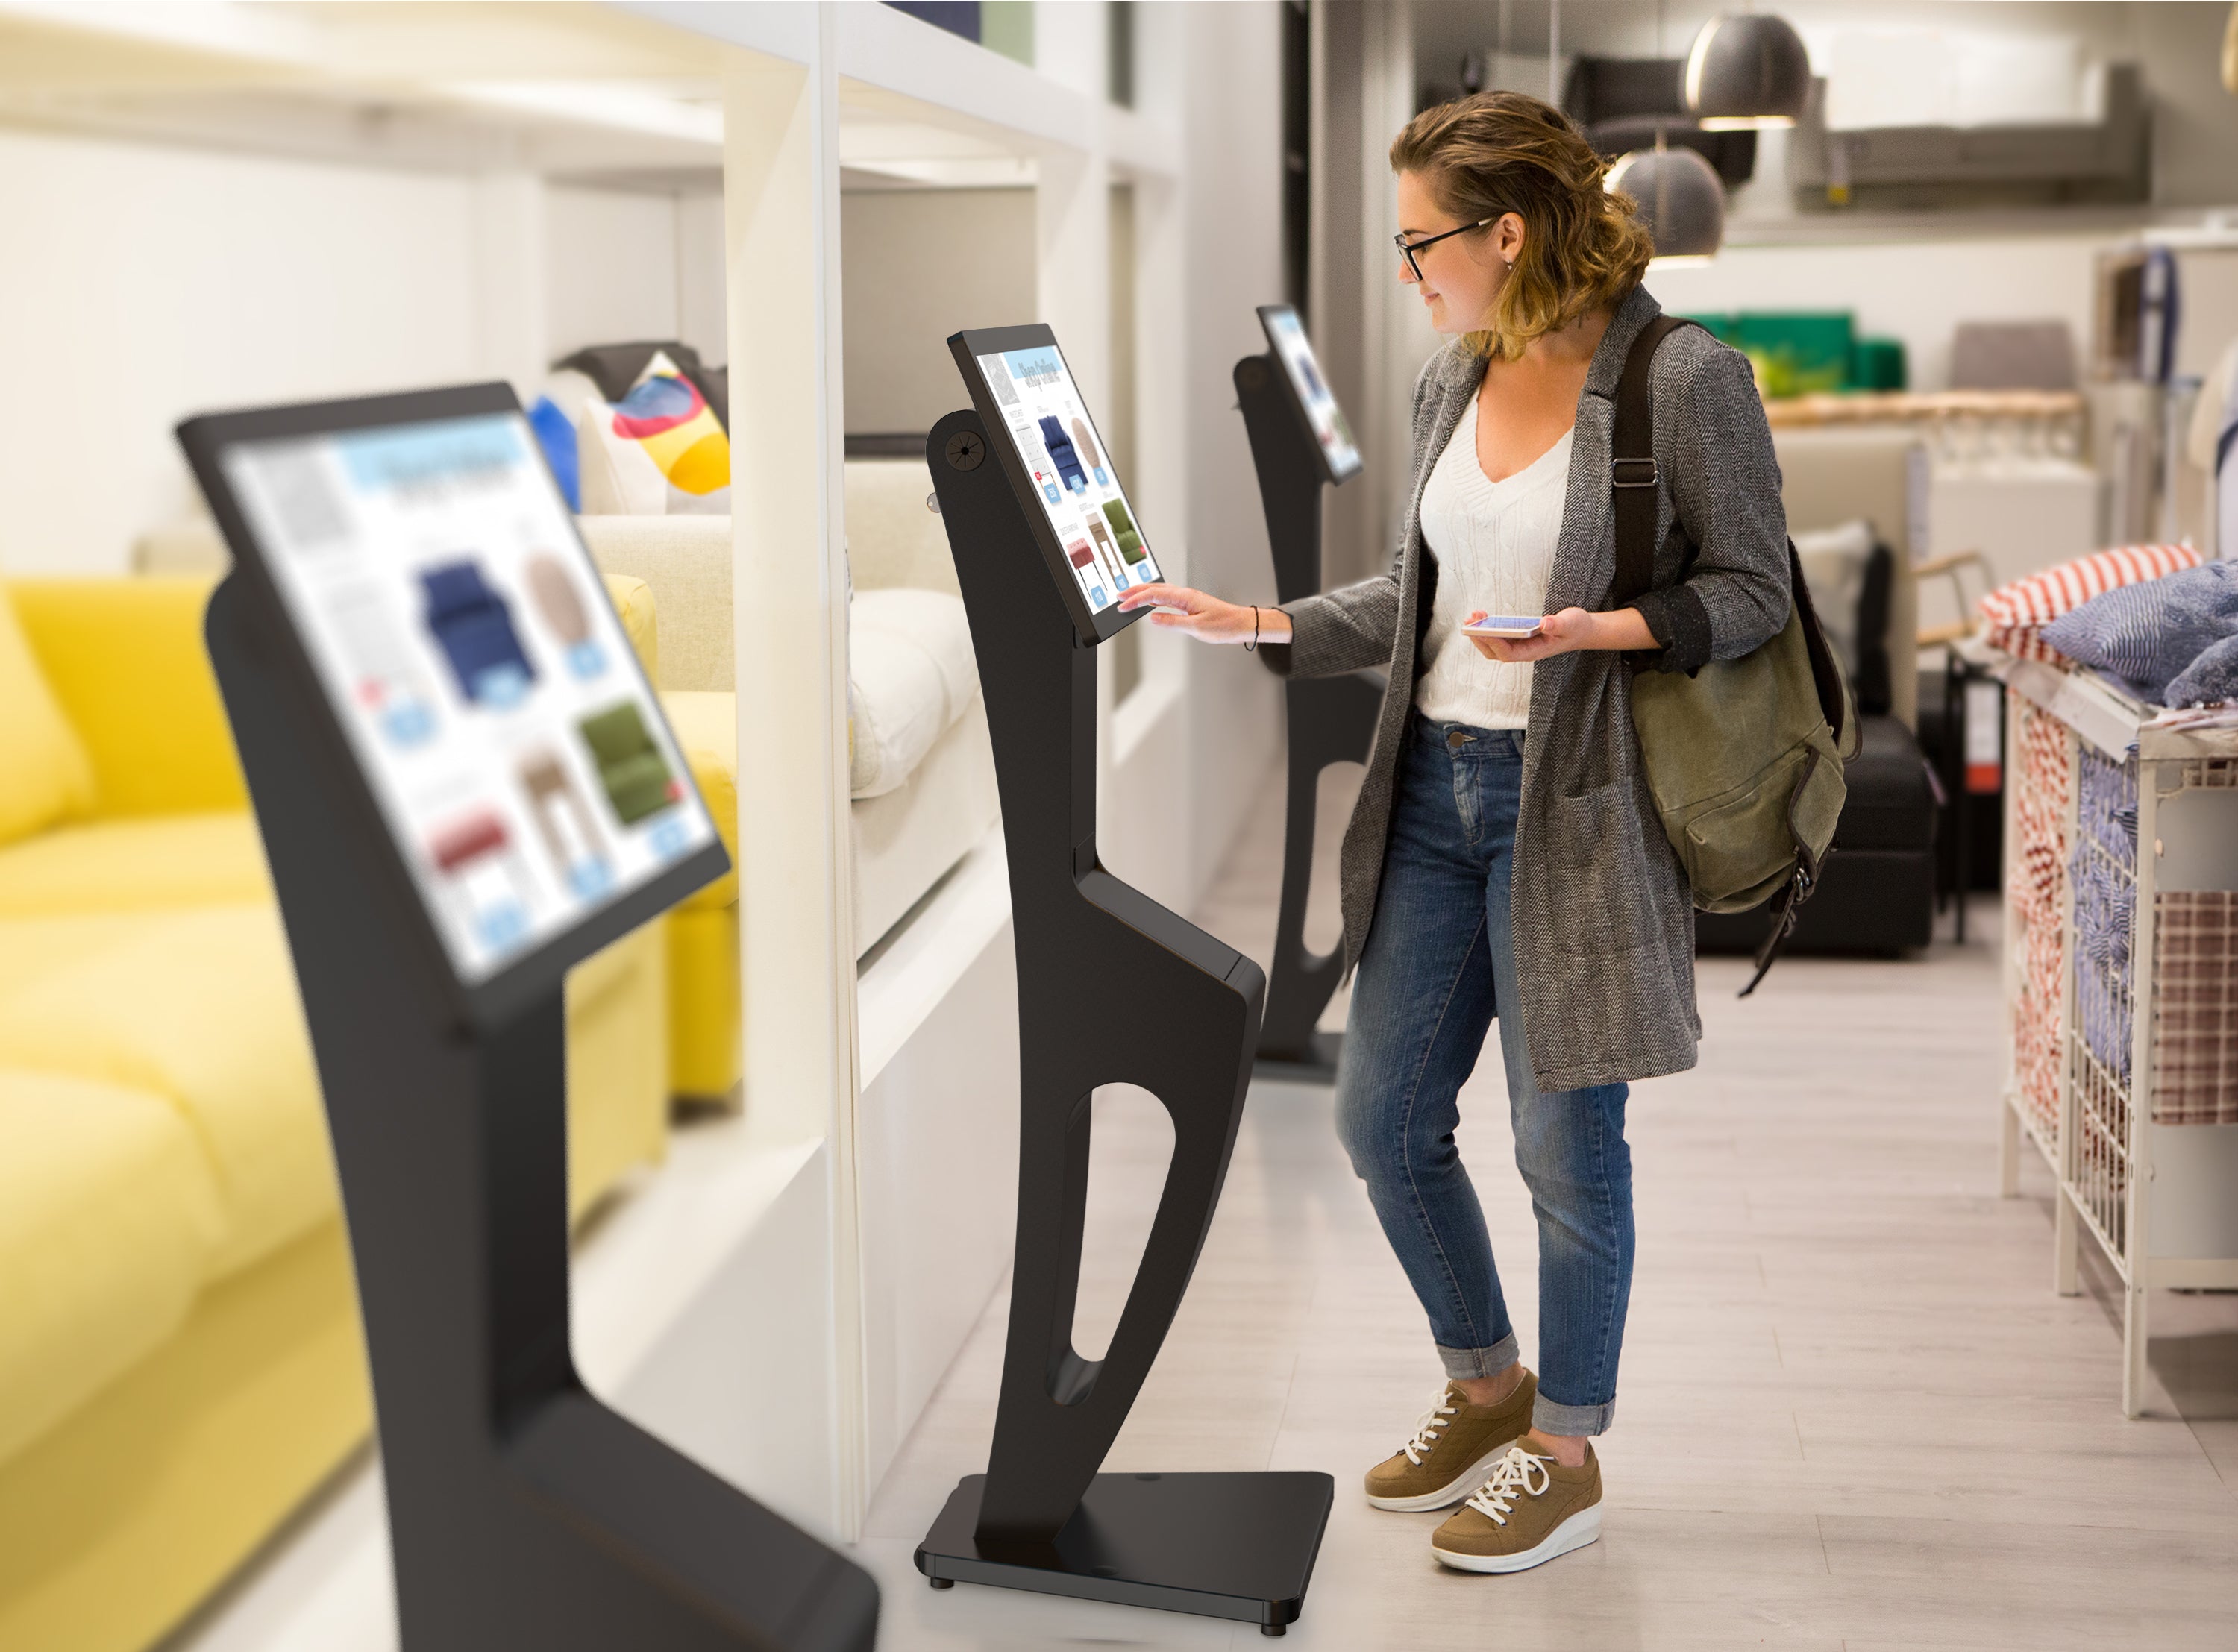 Sleek Floor Stand with Printer Slot for Touchscreen Monitors and Other Displays